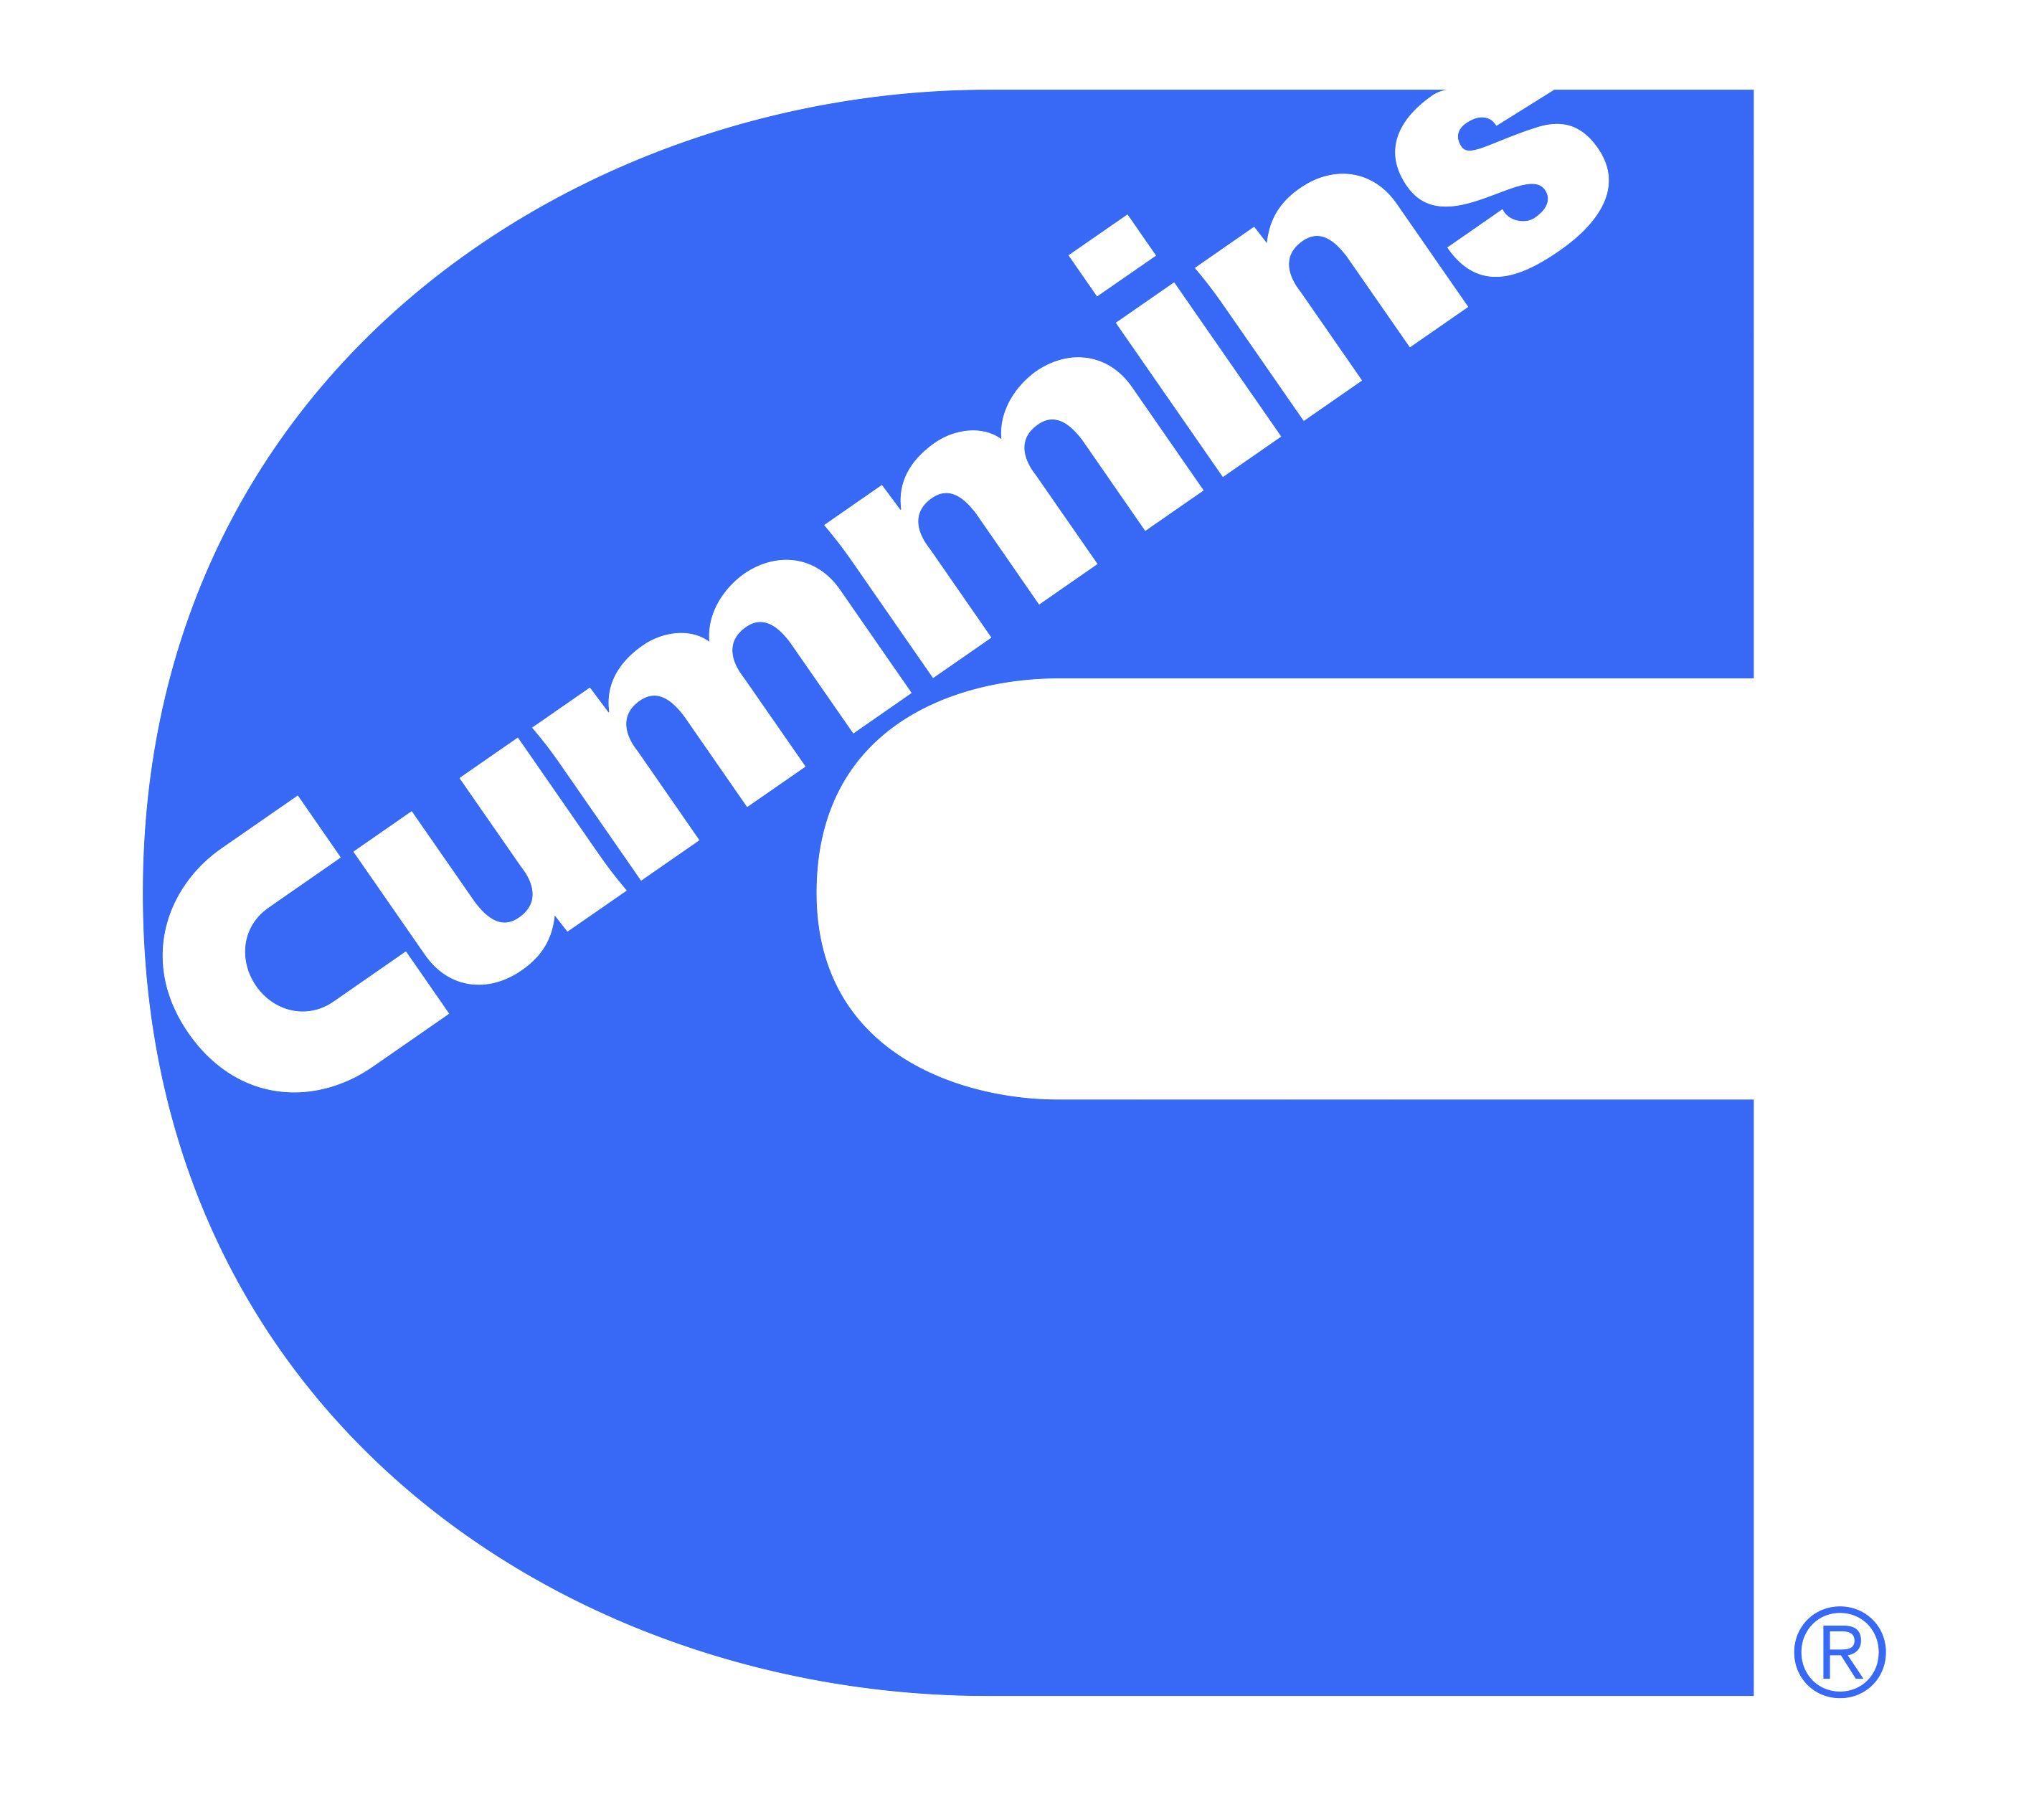 Cummins Logo - Cummins Logo, Cummins Symbol, Meaning, History and Evolution